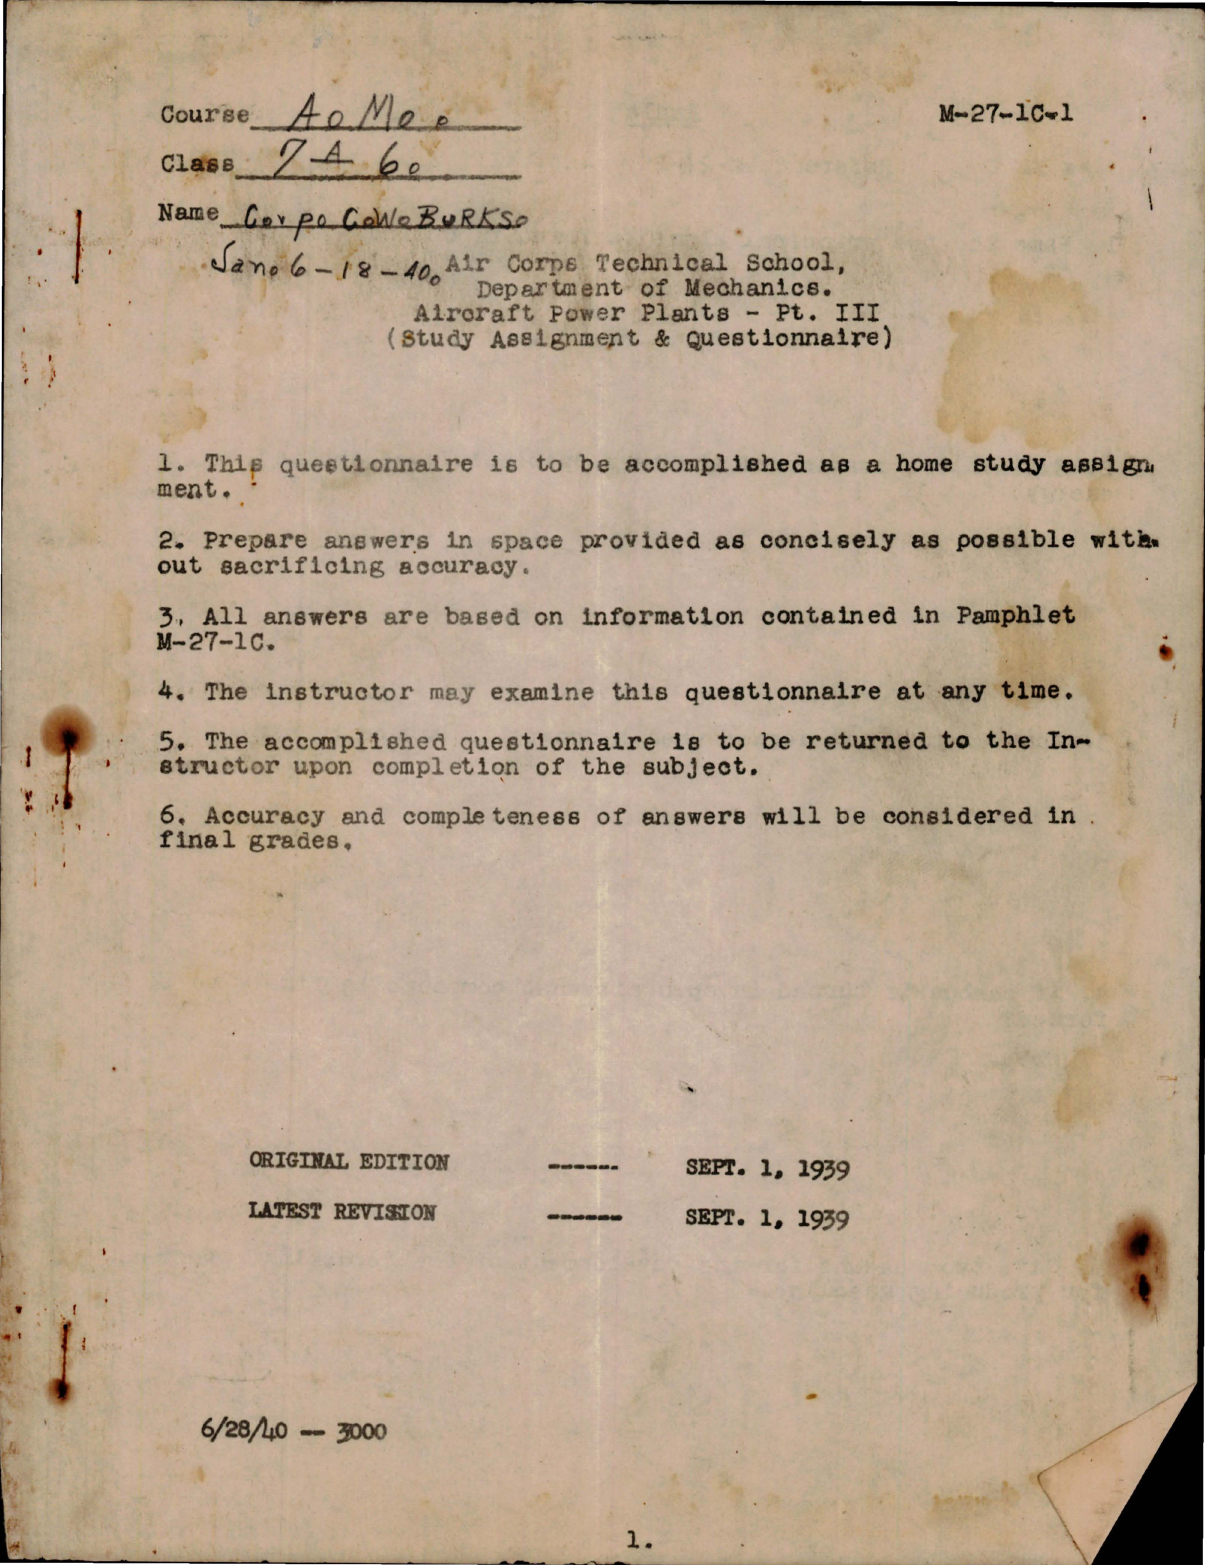 Sample page 1 from AirCorps Library document: Study Assignment and Questionnaire for Aircraft Power Plants - Pt III